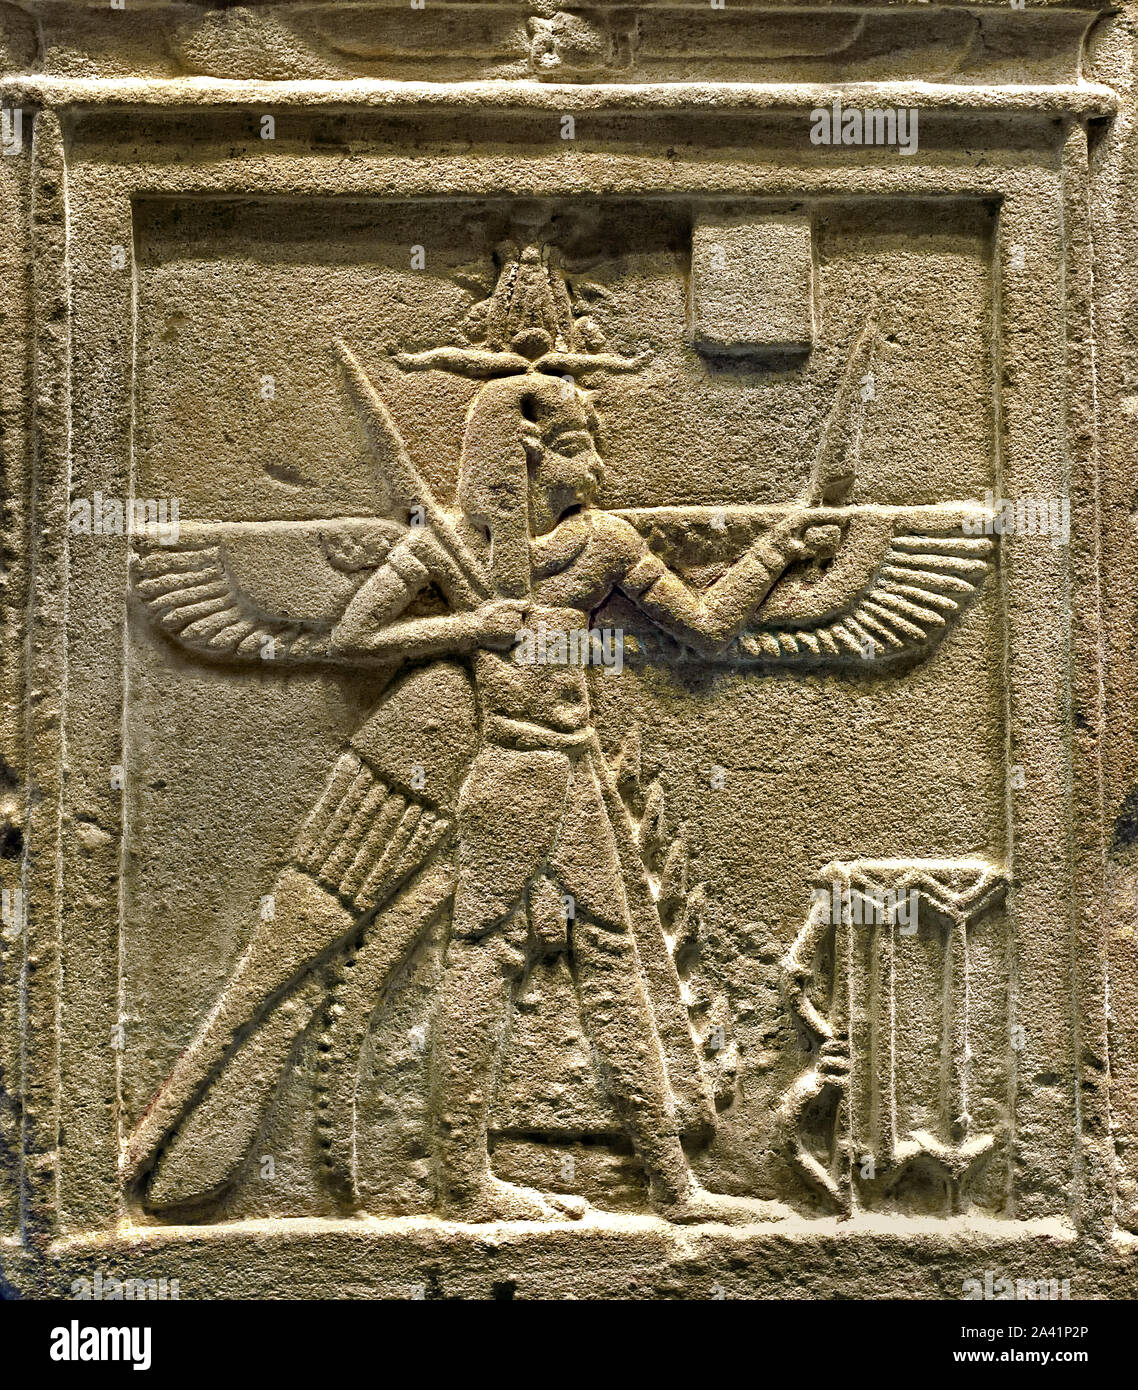 Stele: king-bird armed with knives Ptolemaic period, 332 - 30 BC sandstone,  Egypt, Egyptian. (Kingship, of divine character, can participate in the composition of a panther god). Stock Photo